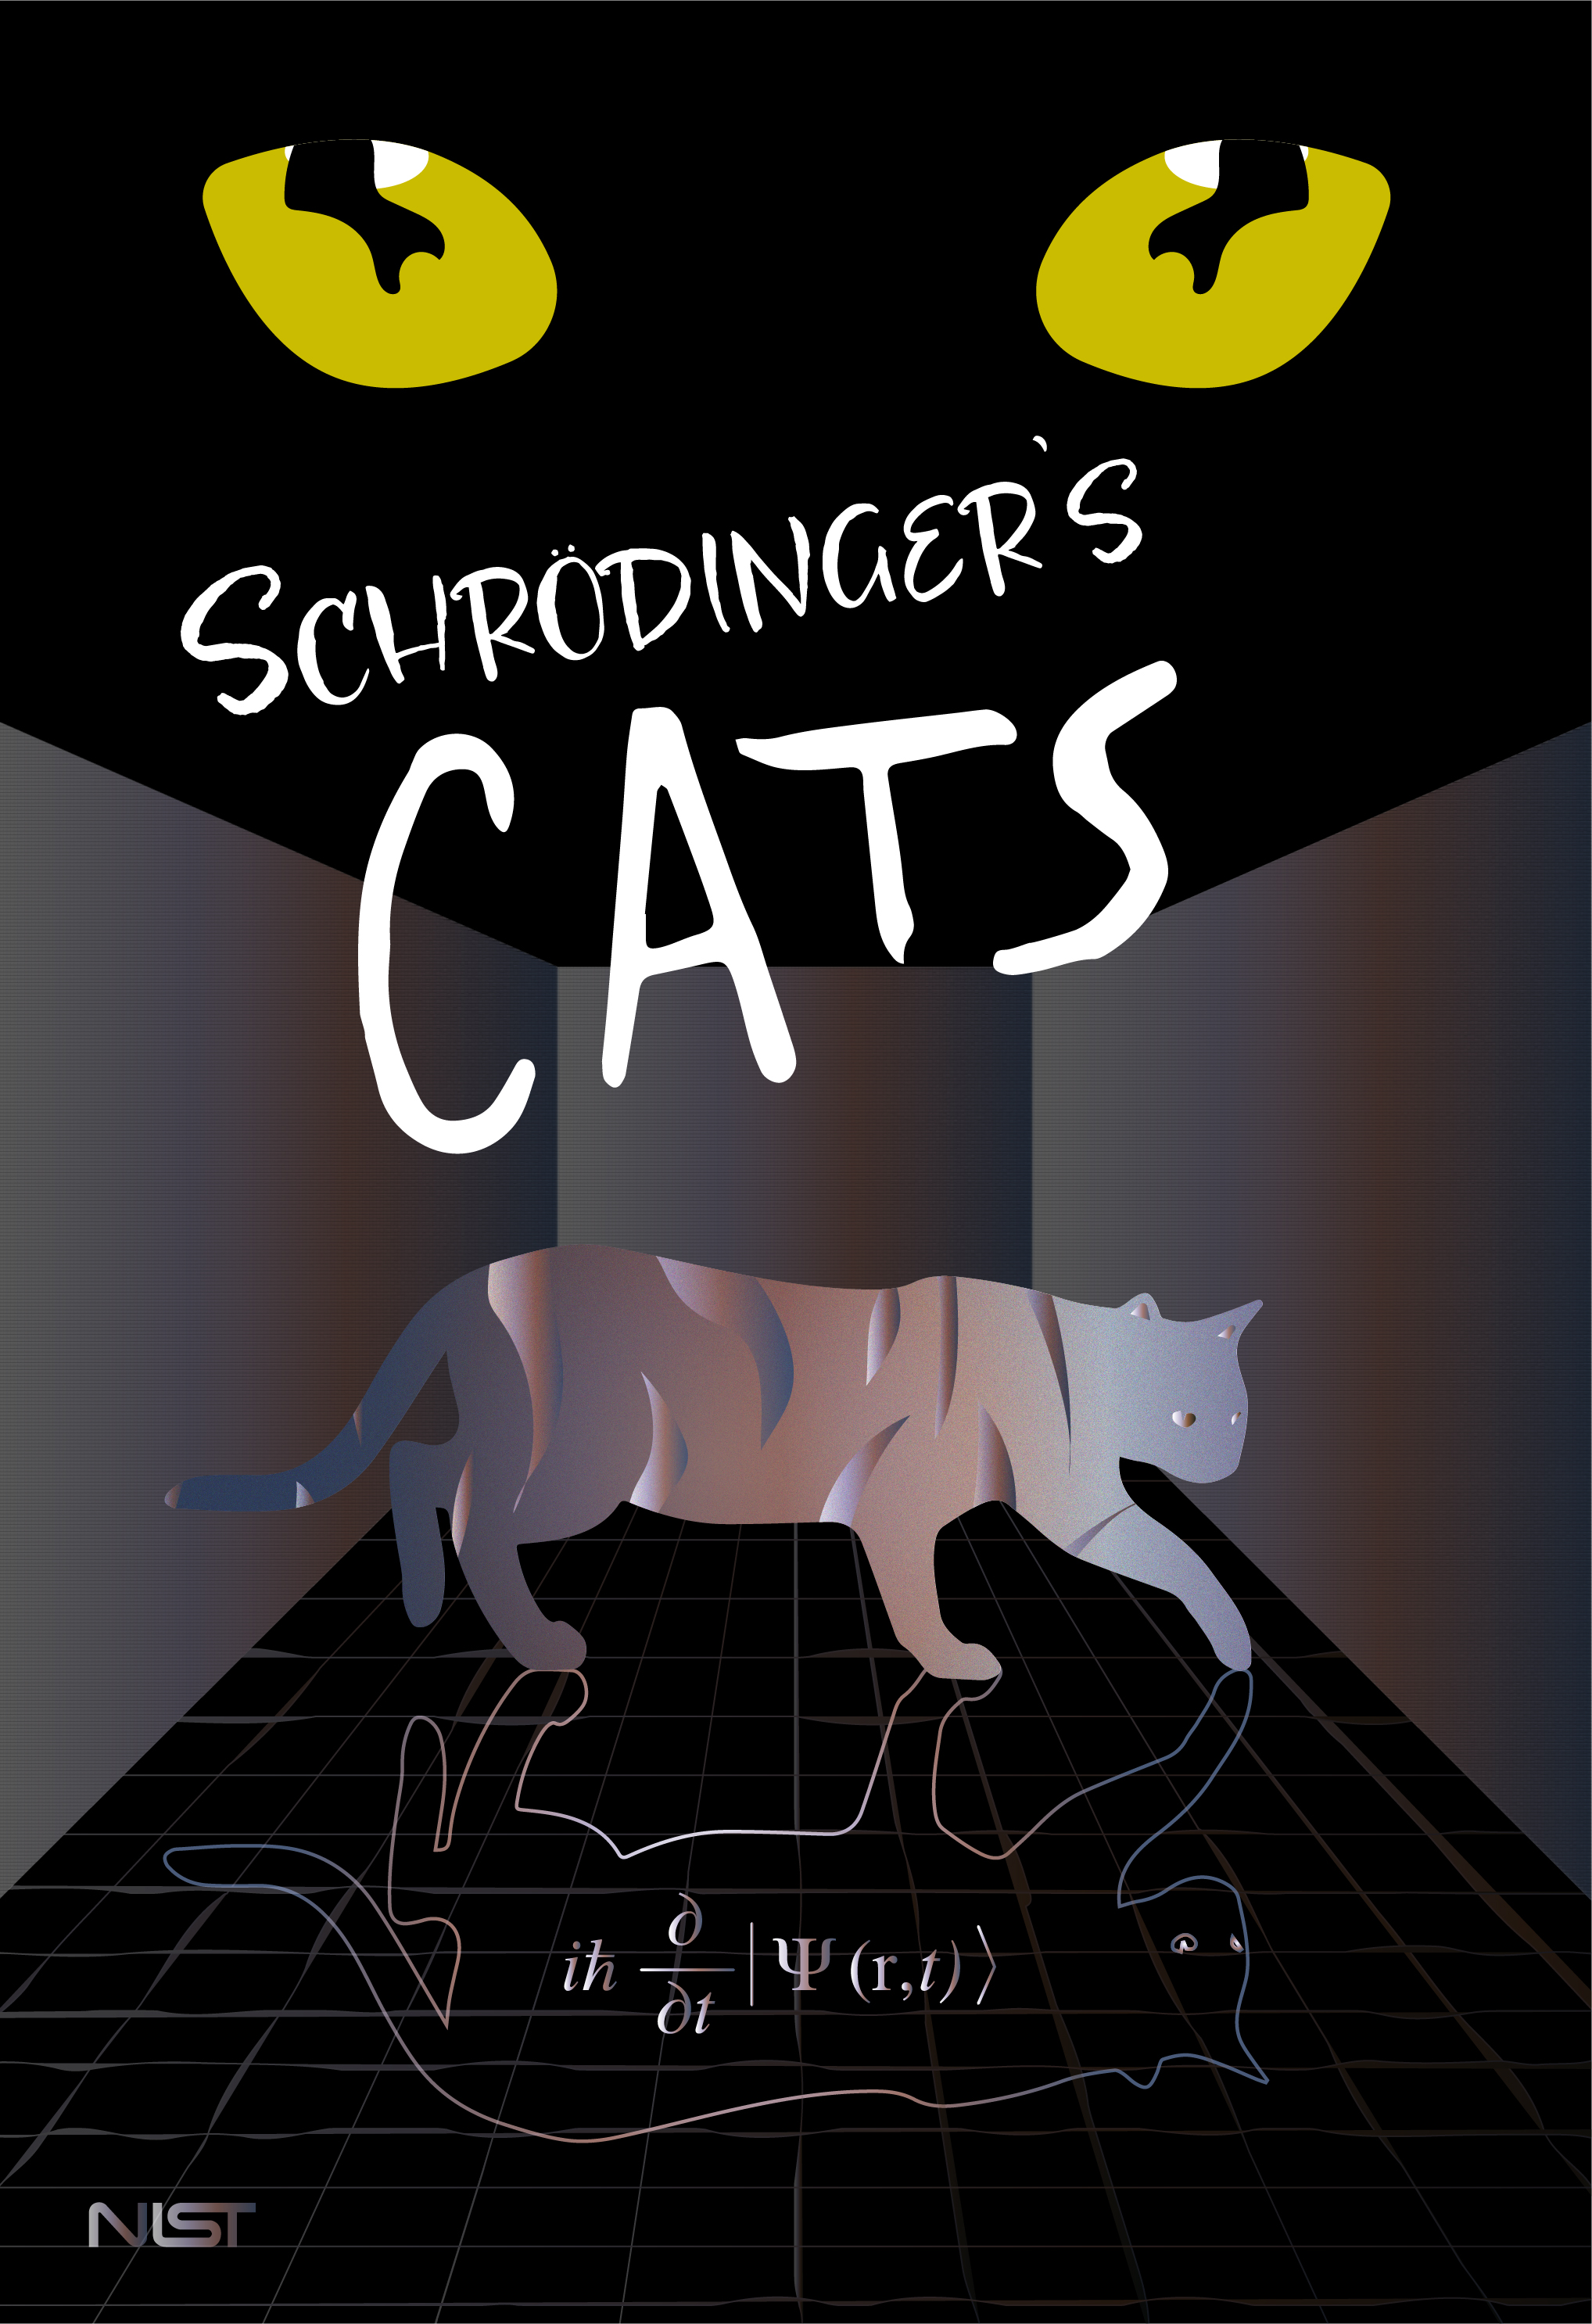 Cat eyes. Words: Schrodinger's Cats. Cat body. Reflection of cat body with a mathematical equation in it